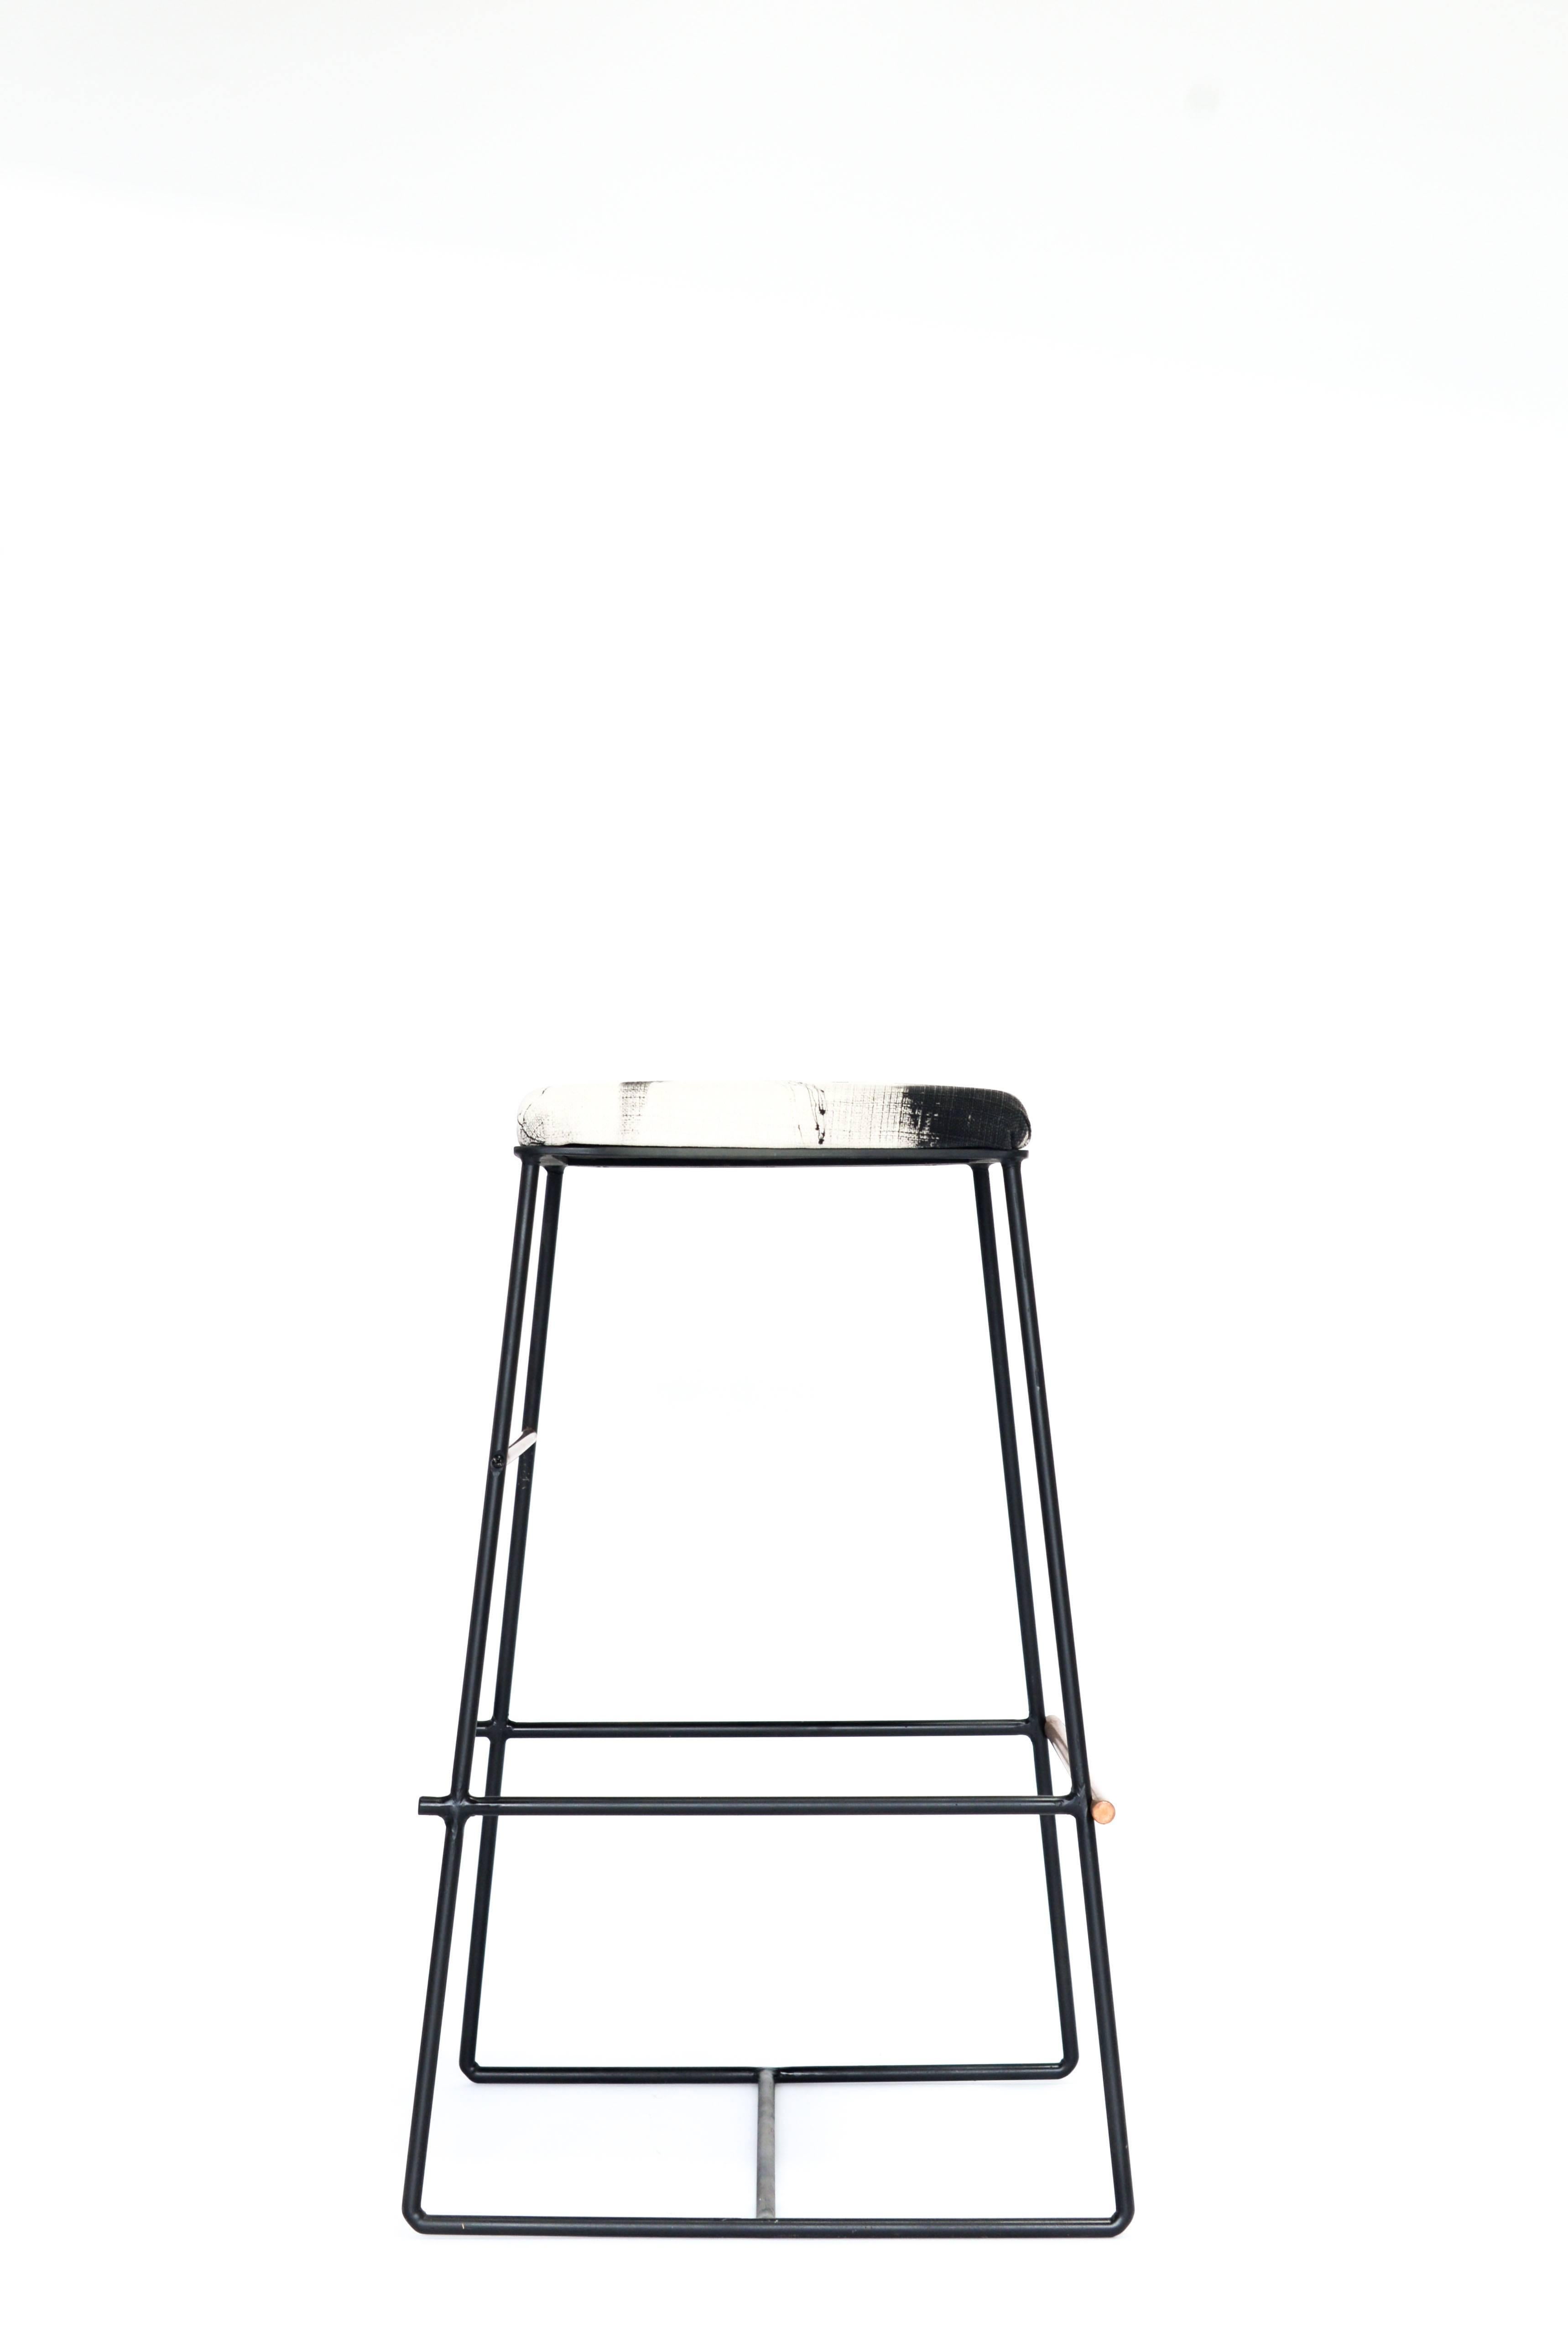 Powder coated metal stool featuring true copper or brass support rod. Made in Los Angeles, California.

Stool shown in Black powder coated metal, with true copper support rod, and custom hand-painted upholstery.

Custom powder coating or plating